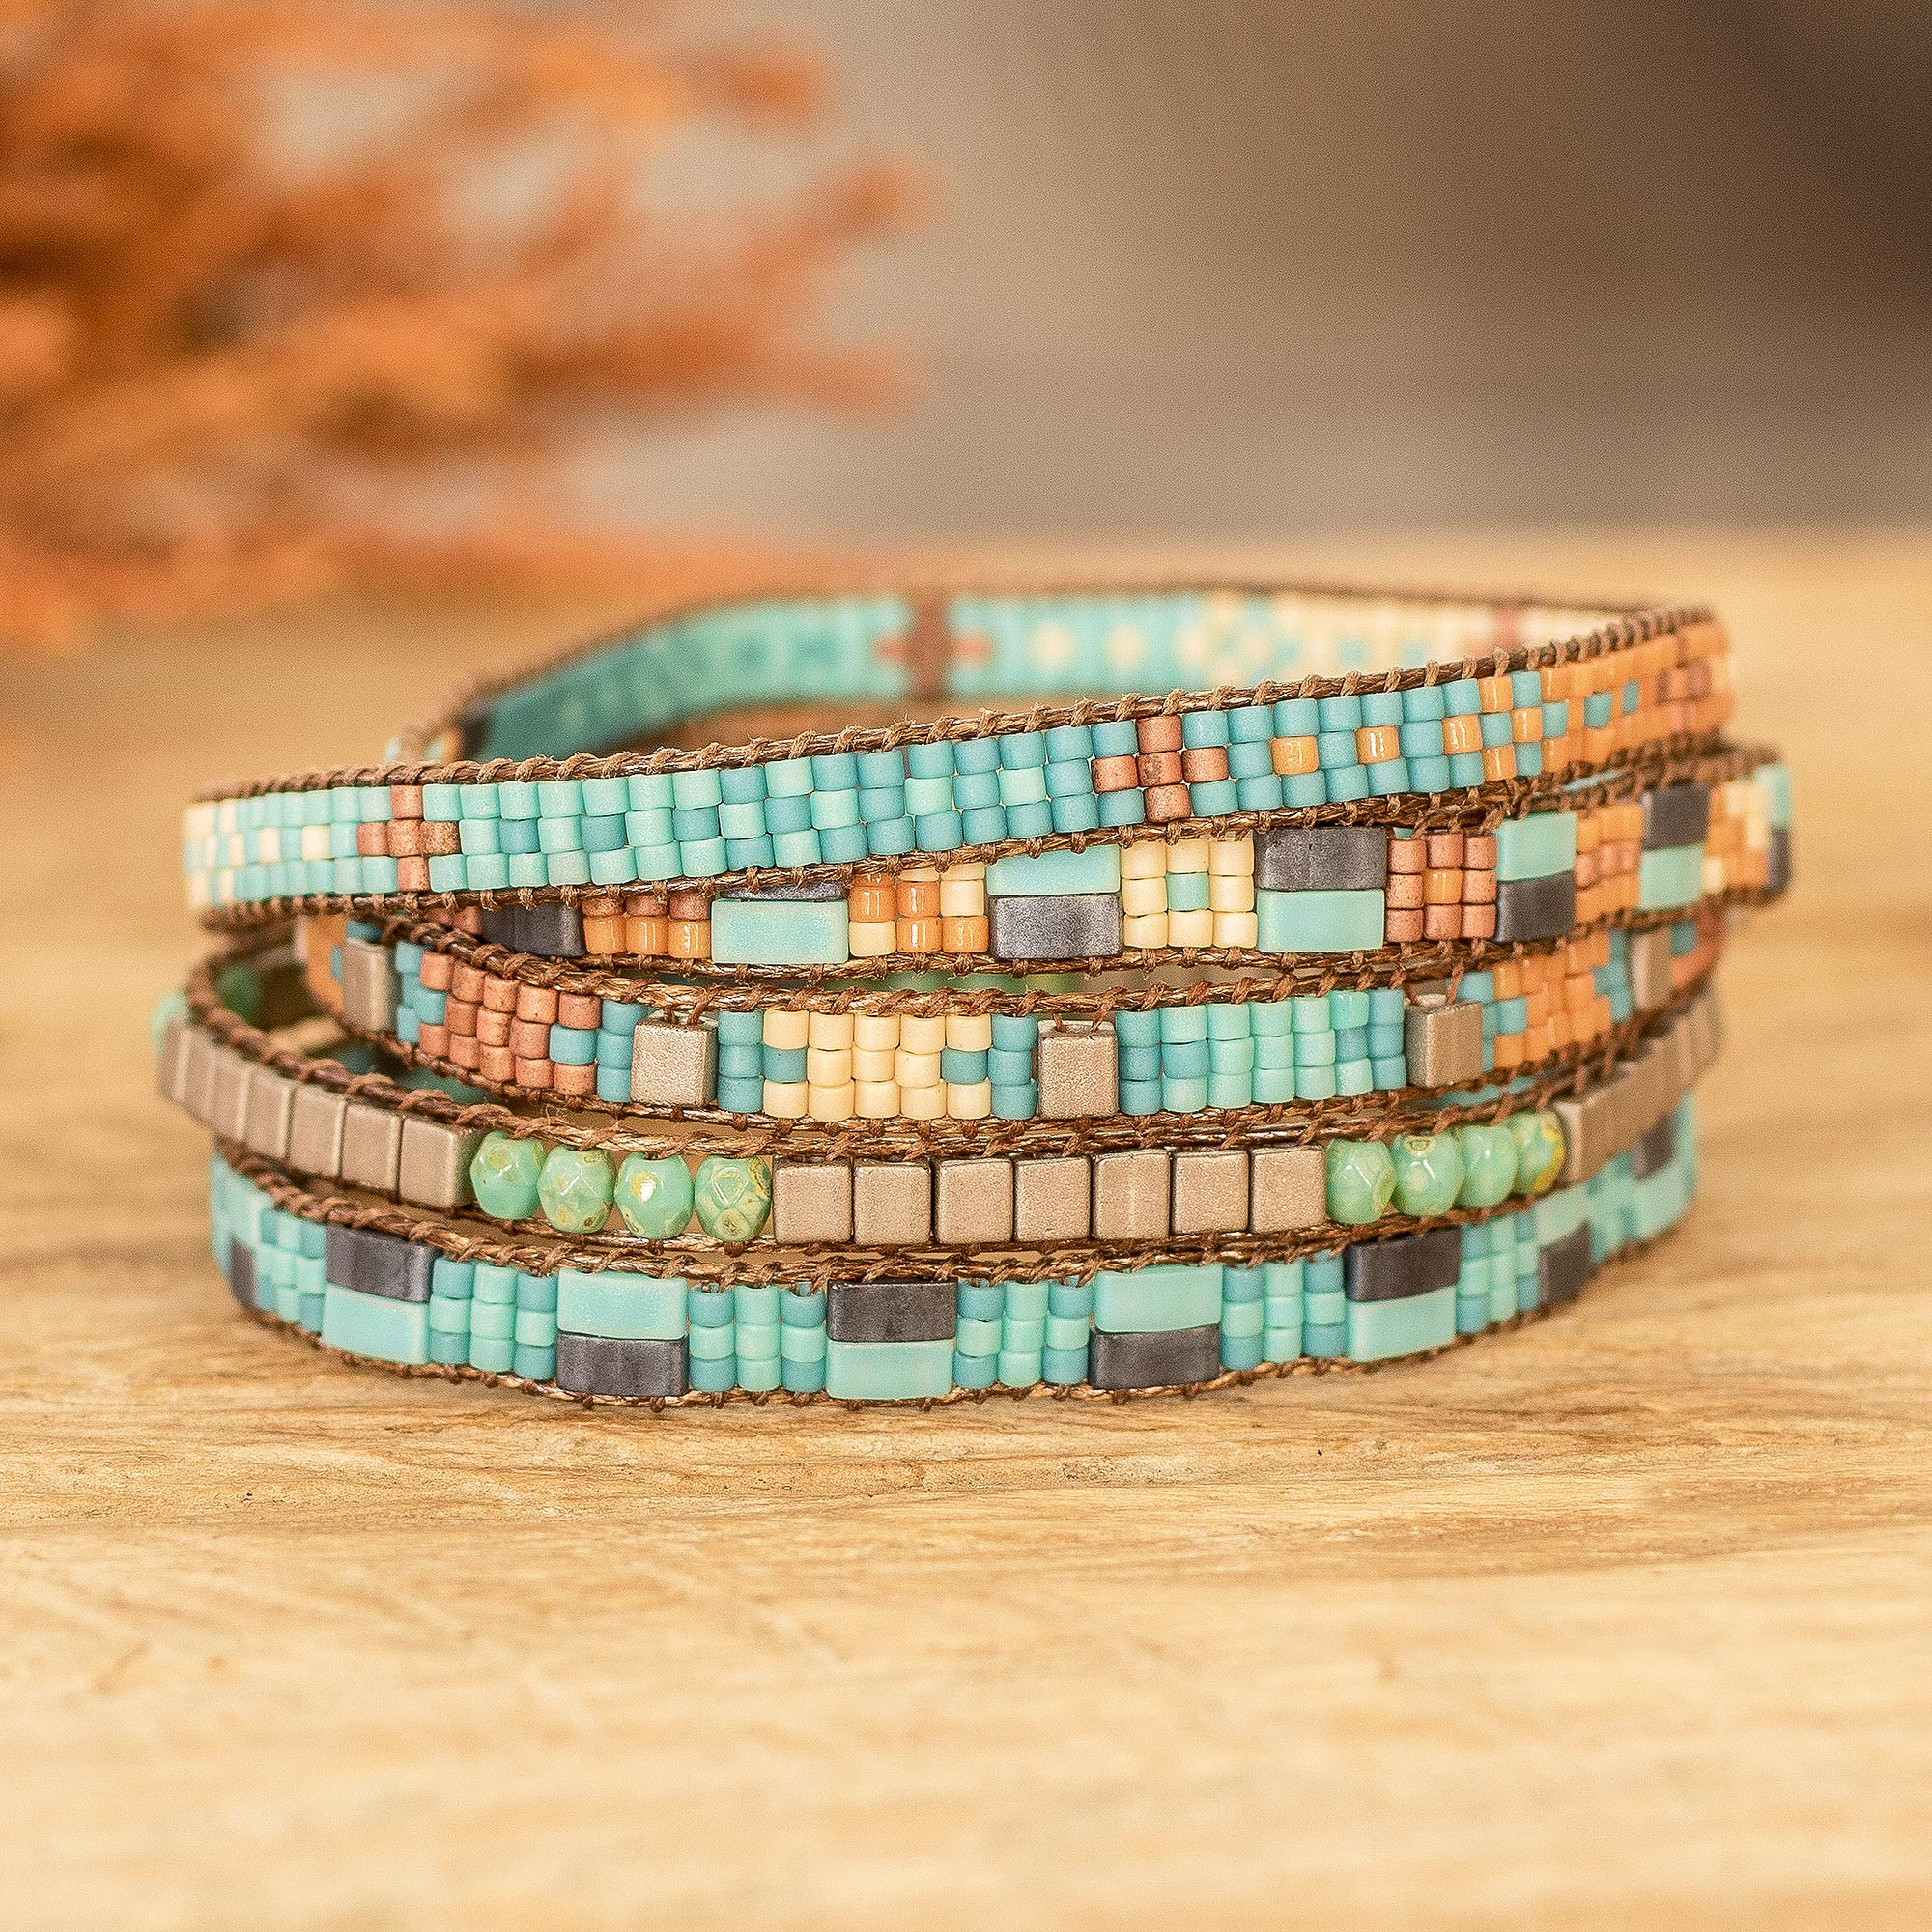 Handmade Beaded Bracelet, Stacking Bracelets, Friendship, Multi Color,  Native American Inspired, Loom, Brown Turquoise Discover Guatemala 